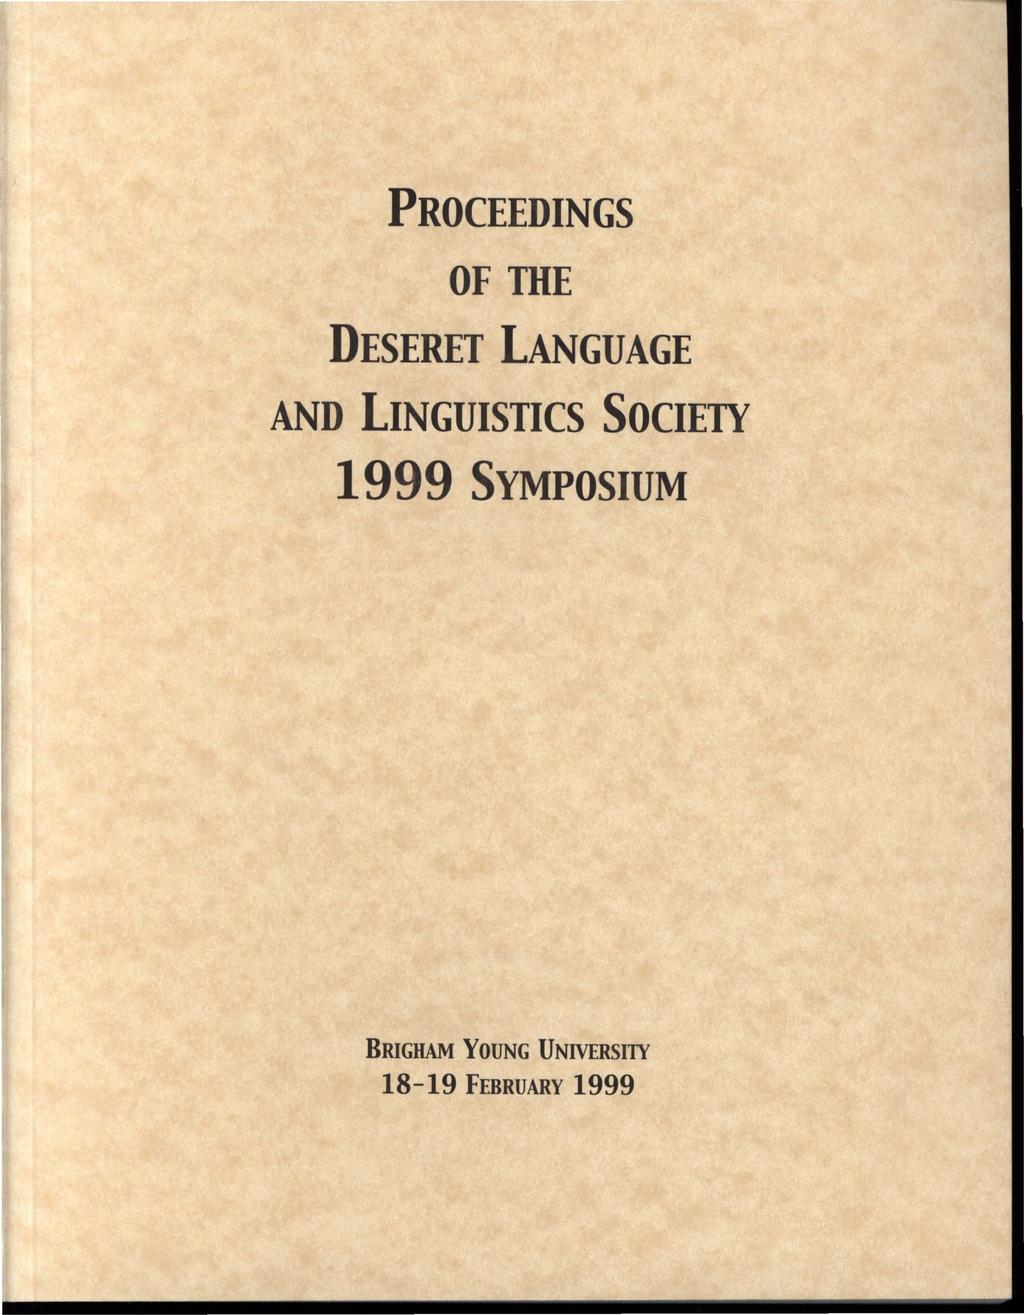 PROCEEDINGS OF THE DESERET LANGUAGE AND LINGUISTICS SOCIETY